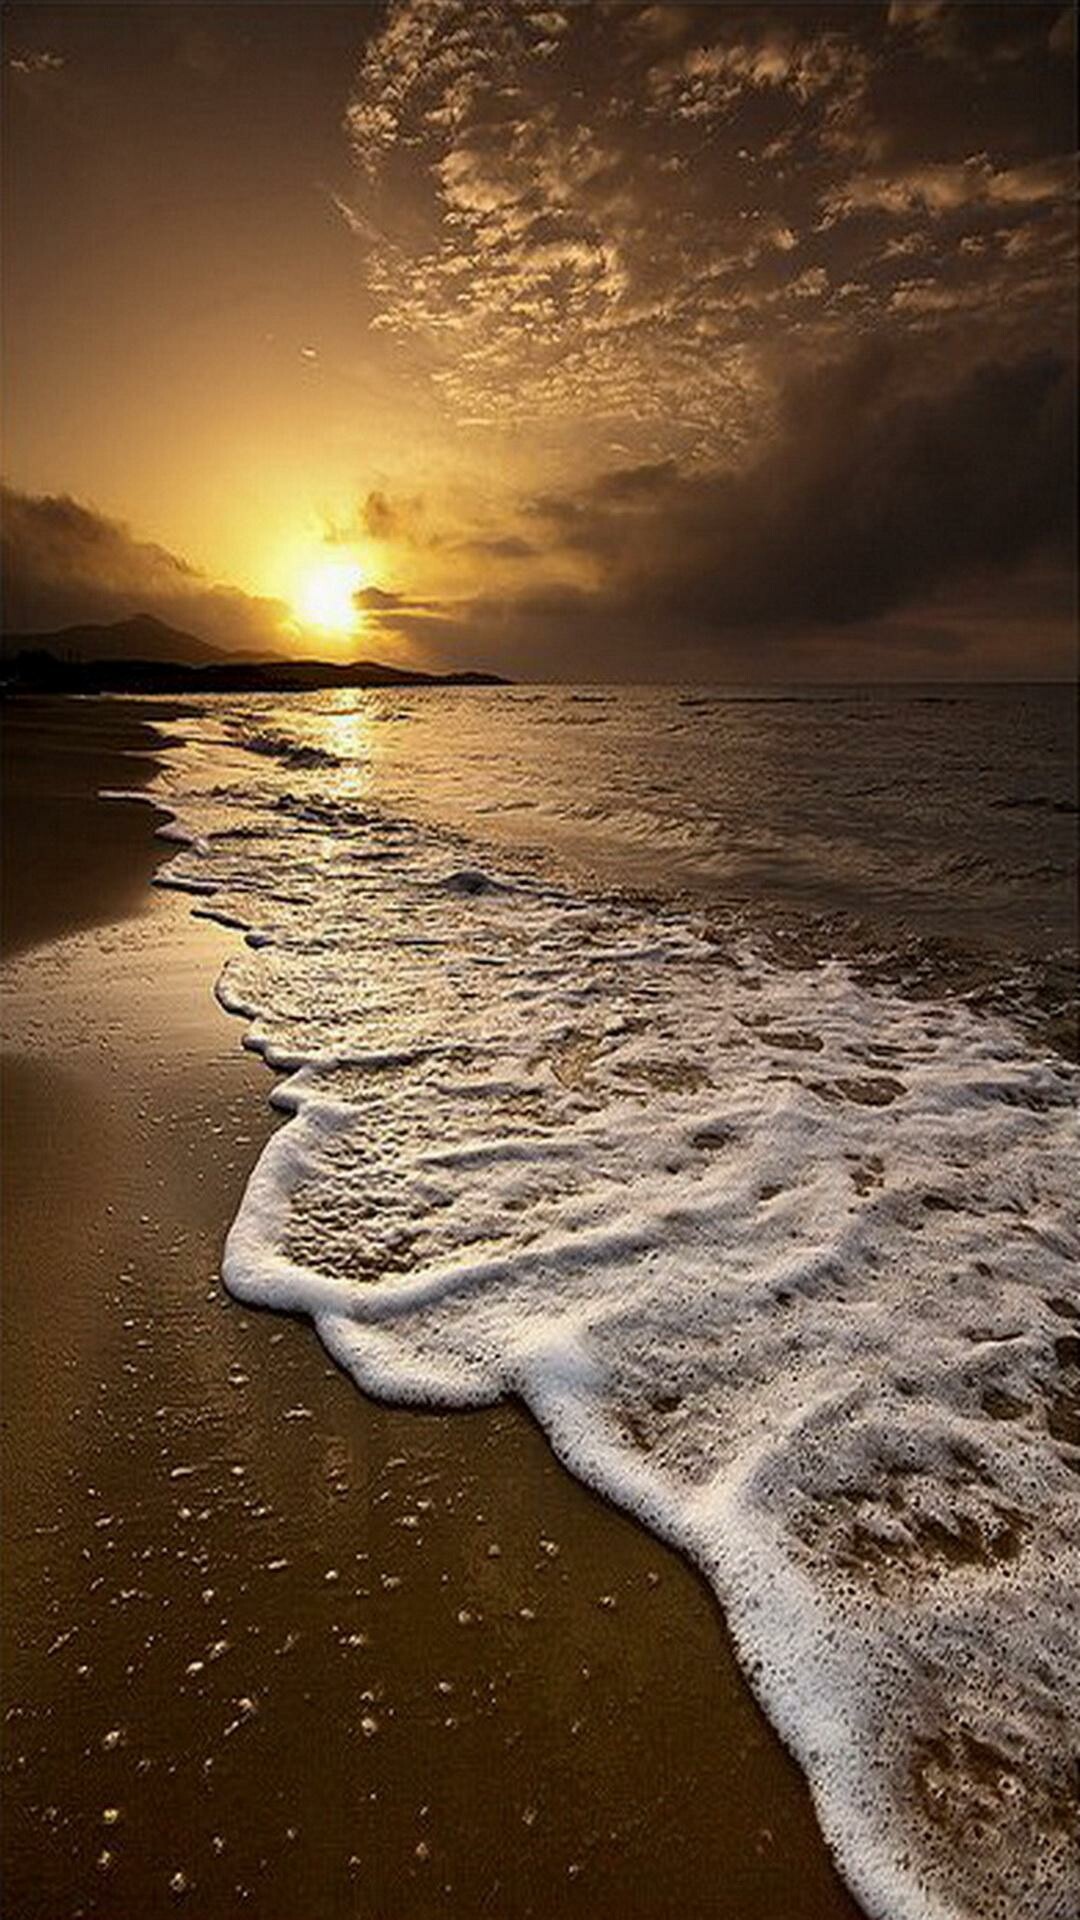 Sun and sea, Exquisite mobile wallpaper, Coastal delight, Mesmerizing beauty, 1080x1920 Full HD Phone